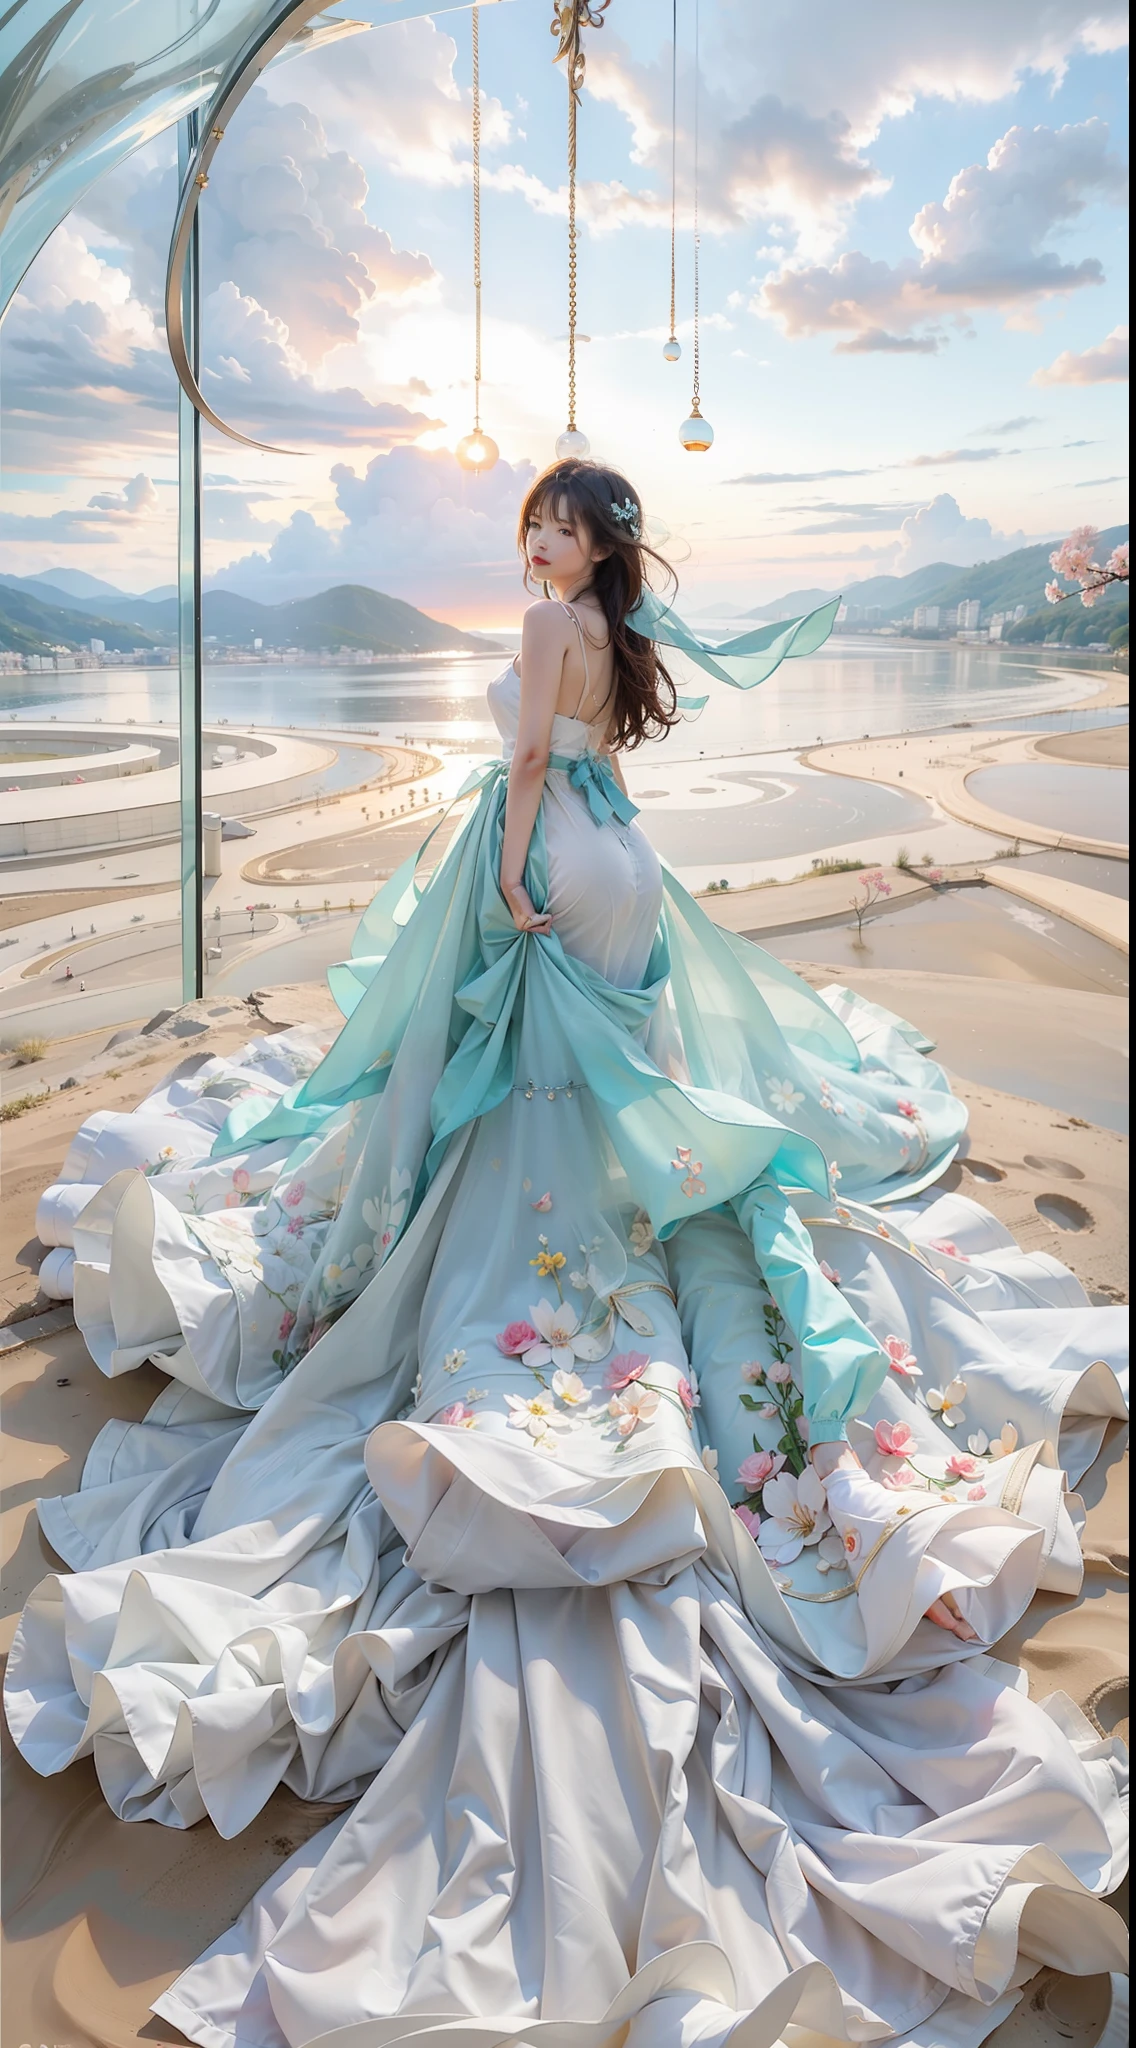 top-quality、​masterpiece、Angle from above、Japan women、18year old、A dark-haired、Lustrous hair、short-cut、Straight hair、Korean Style Beauty、big eye、Double eyes、、all-fours、Reach out to the front、White Ruffled Chiffon Sleeveless Top, White Tulle Maxi Skirt Dress, Mermaid Line, wicker basket bag,Massive landscape, Giant Glass Bottle, hour glass, A Divided World, colorful petals, Blue sky, white clouds, Vast meadow, surreal atmosphere, captivating scene, Delicate flowers, Gentle beauty, Encapsulated nature, Distant horizon, Ethereal Atmosphere, seductive sight, Grit, Time lapse, intricate designs, Transparent container, Suspended reality, Complex mechanism, tranquil surroundings, Timelapse, suspended animation, Contrasting areas, Seductive colors, Swirling sand, Seamless migration, Captivating display
, masutepiece